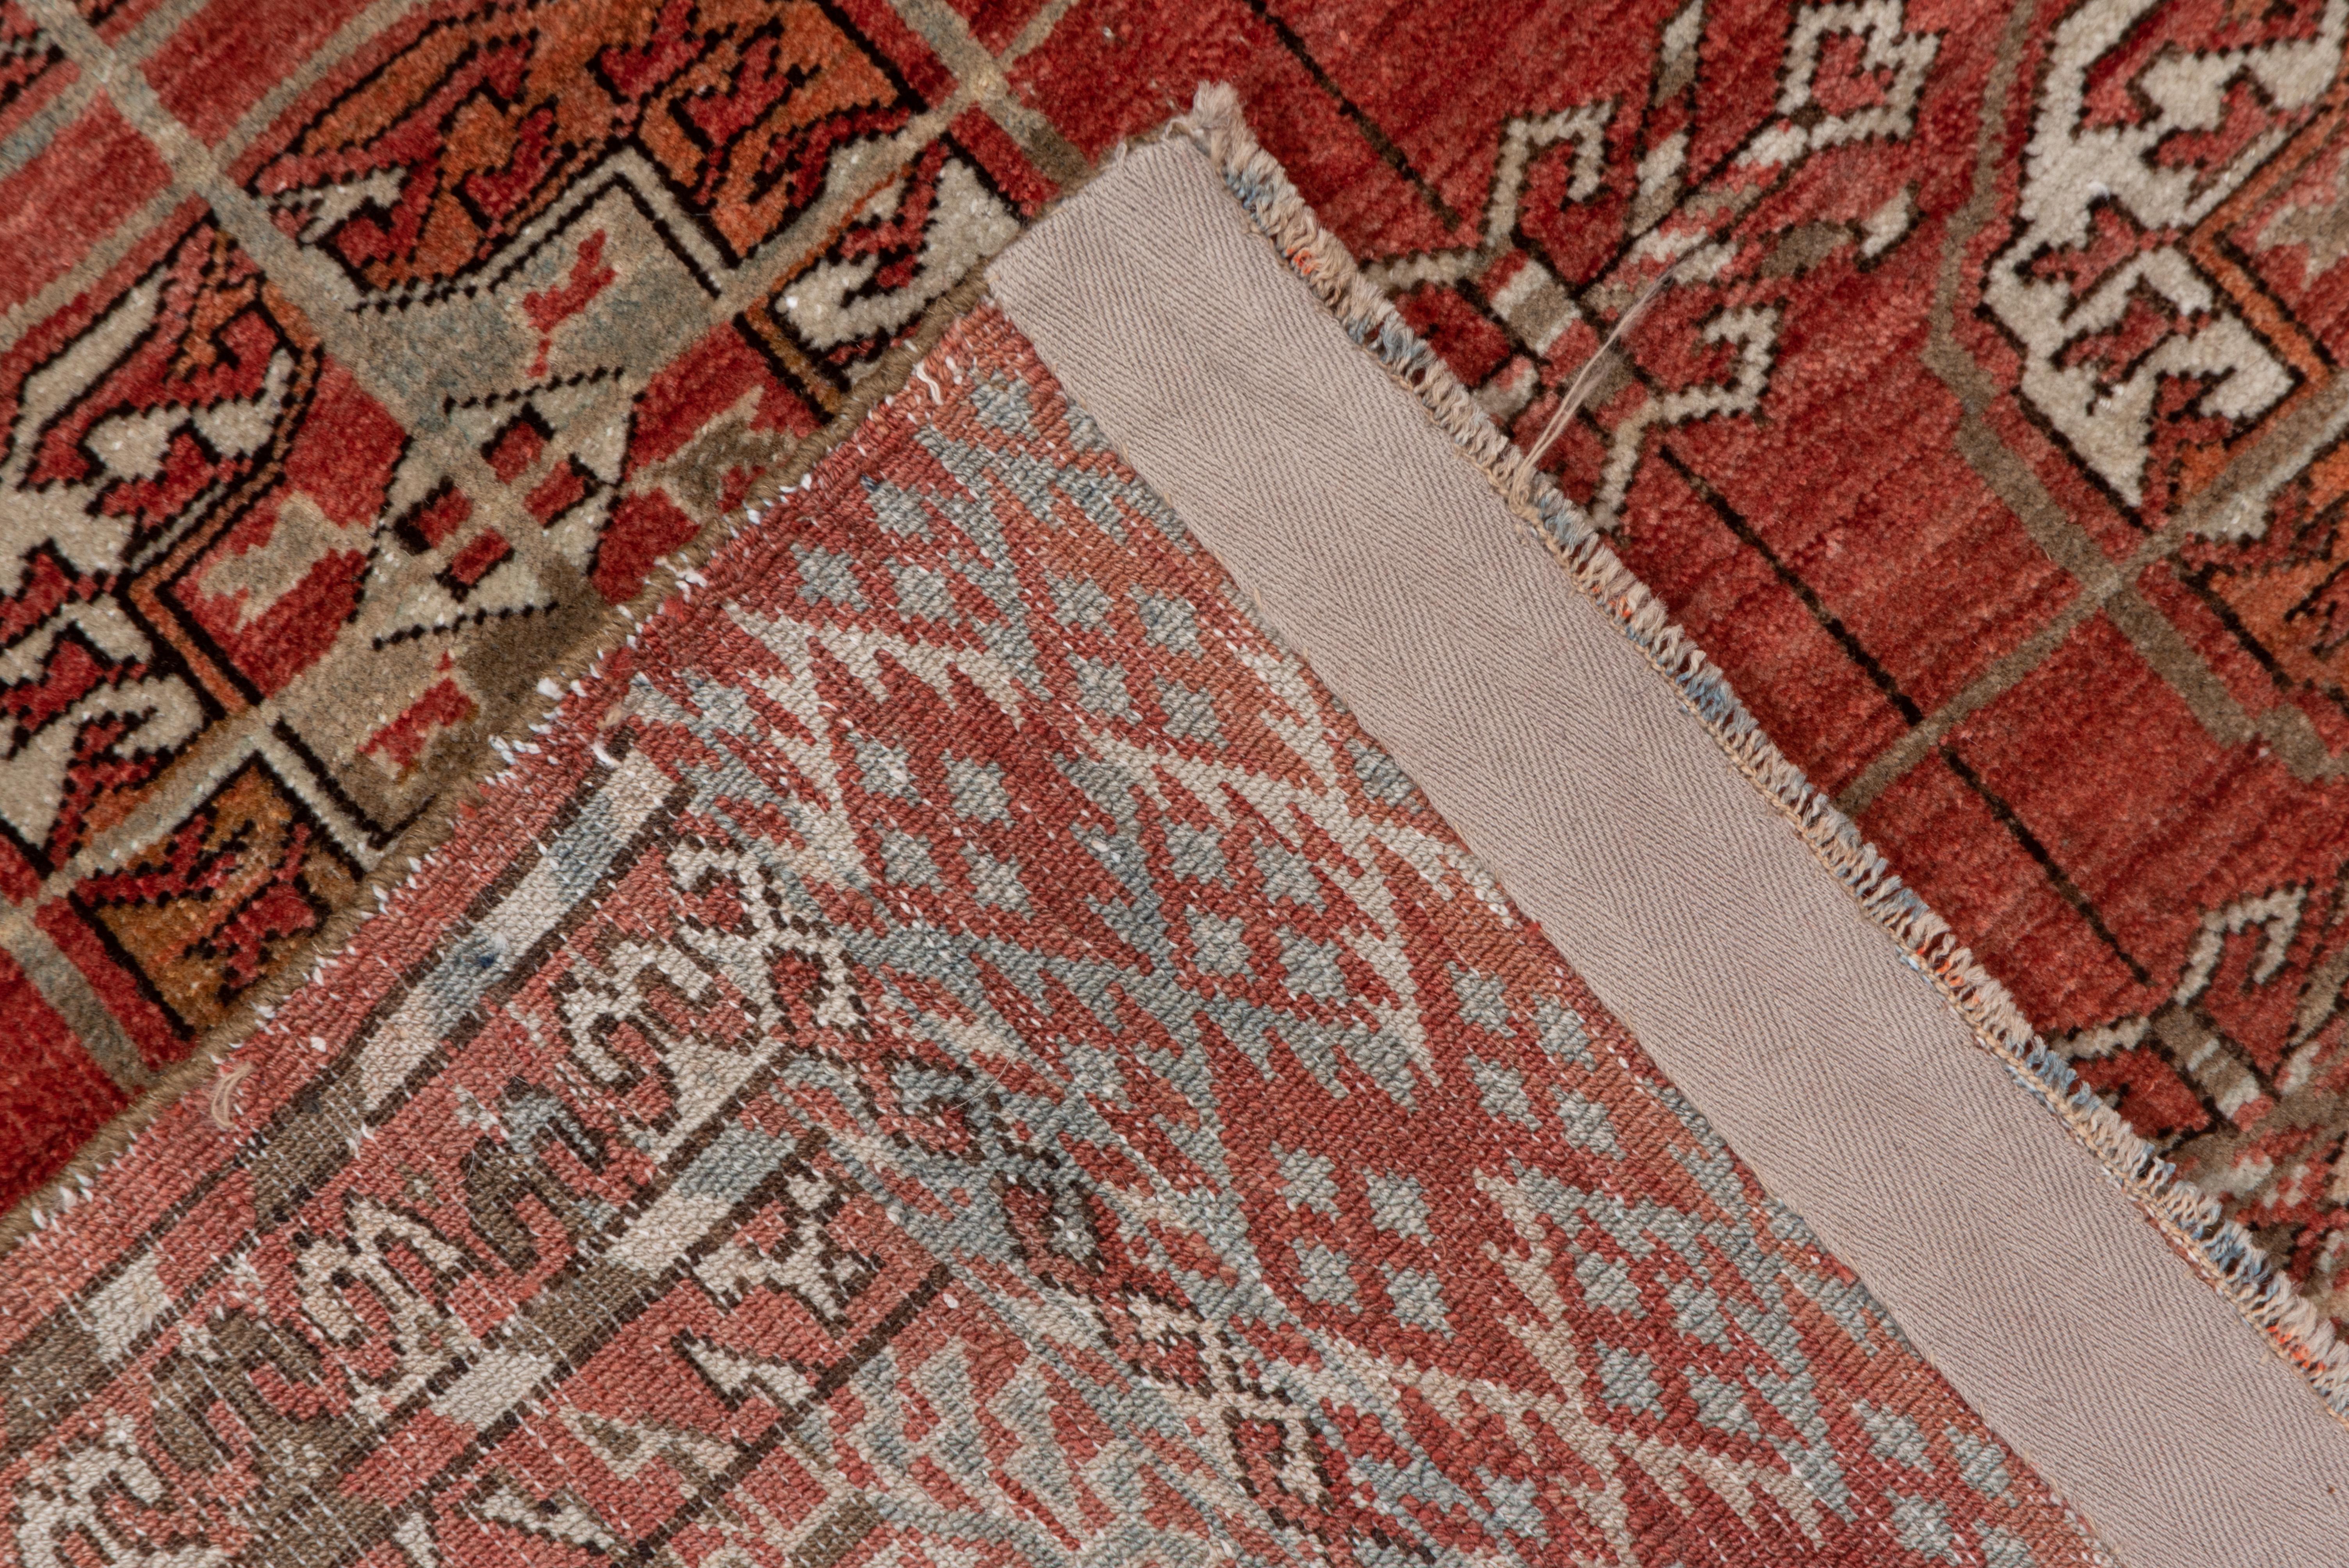 The striated red field of this Central Asian nomadic piece shows a 4 by 8 array of characteristic quartered tribal octagonal guls, bordered by a run of rayed small octagons. At each end is an extra border panel (elem) with a mosaic dot and X-pattern.